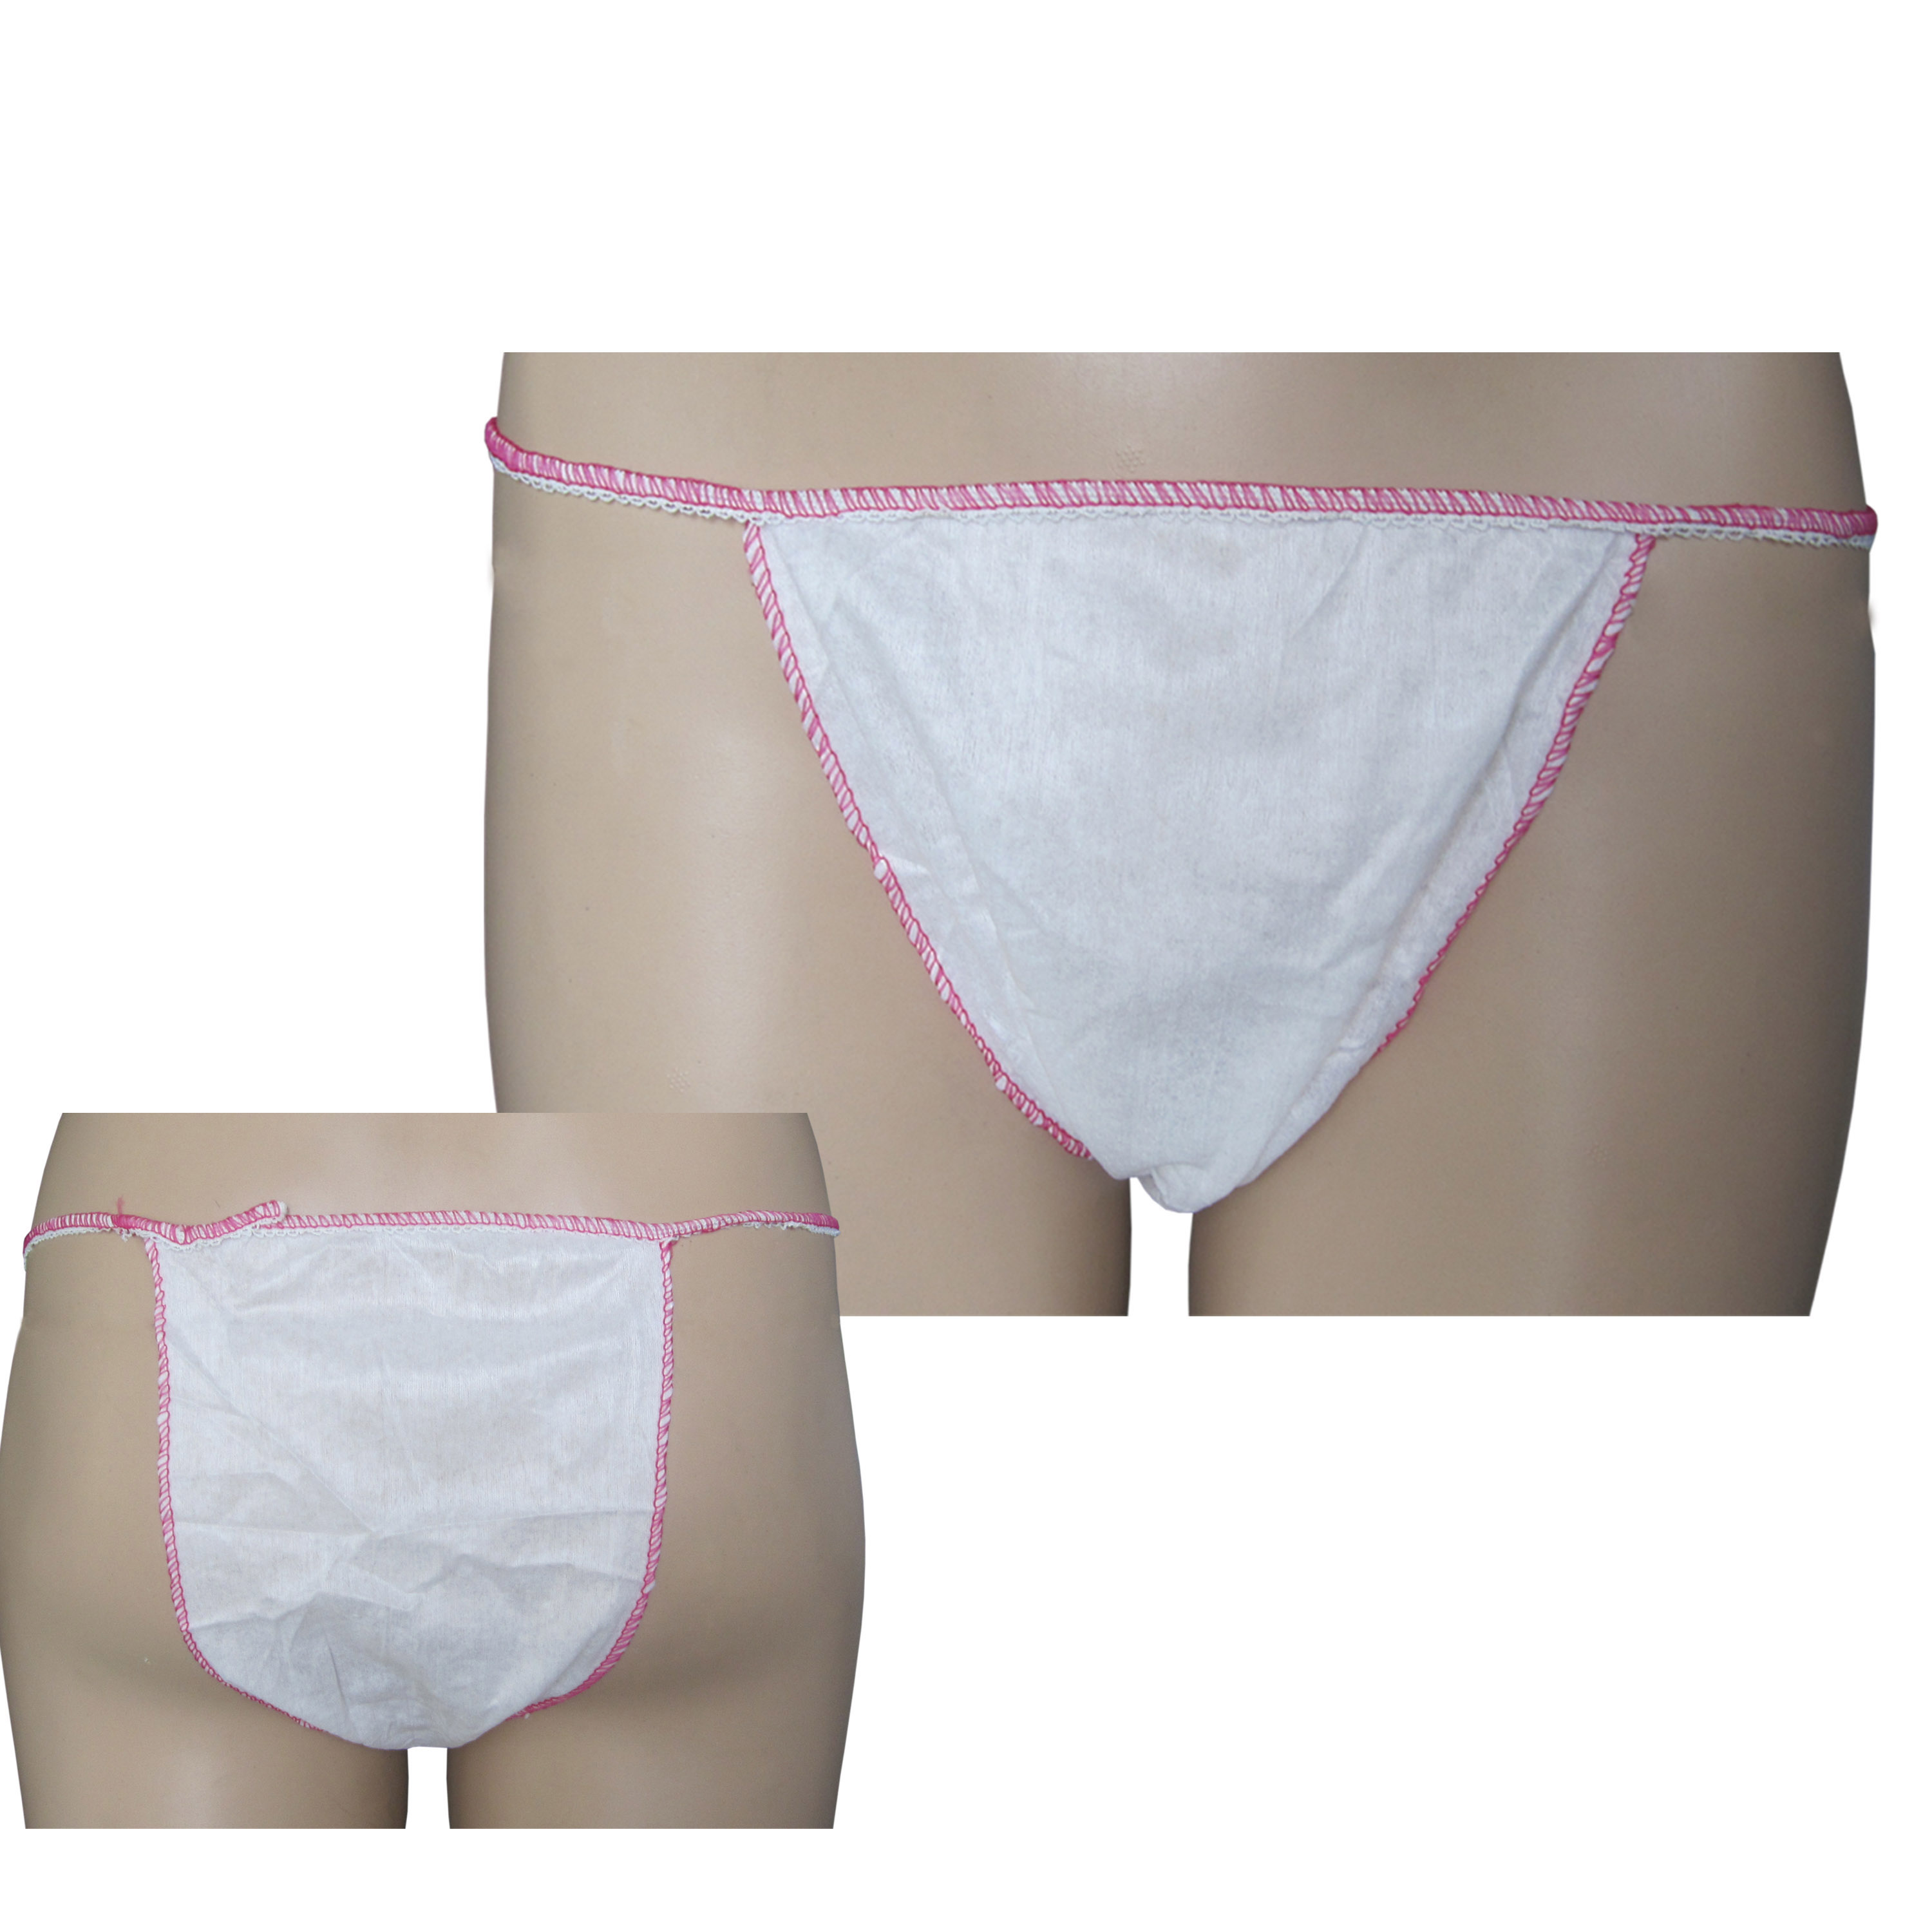 Disposable nonwoven Thong for Man